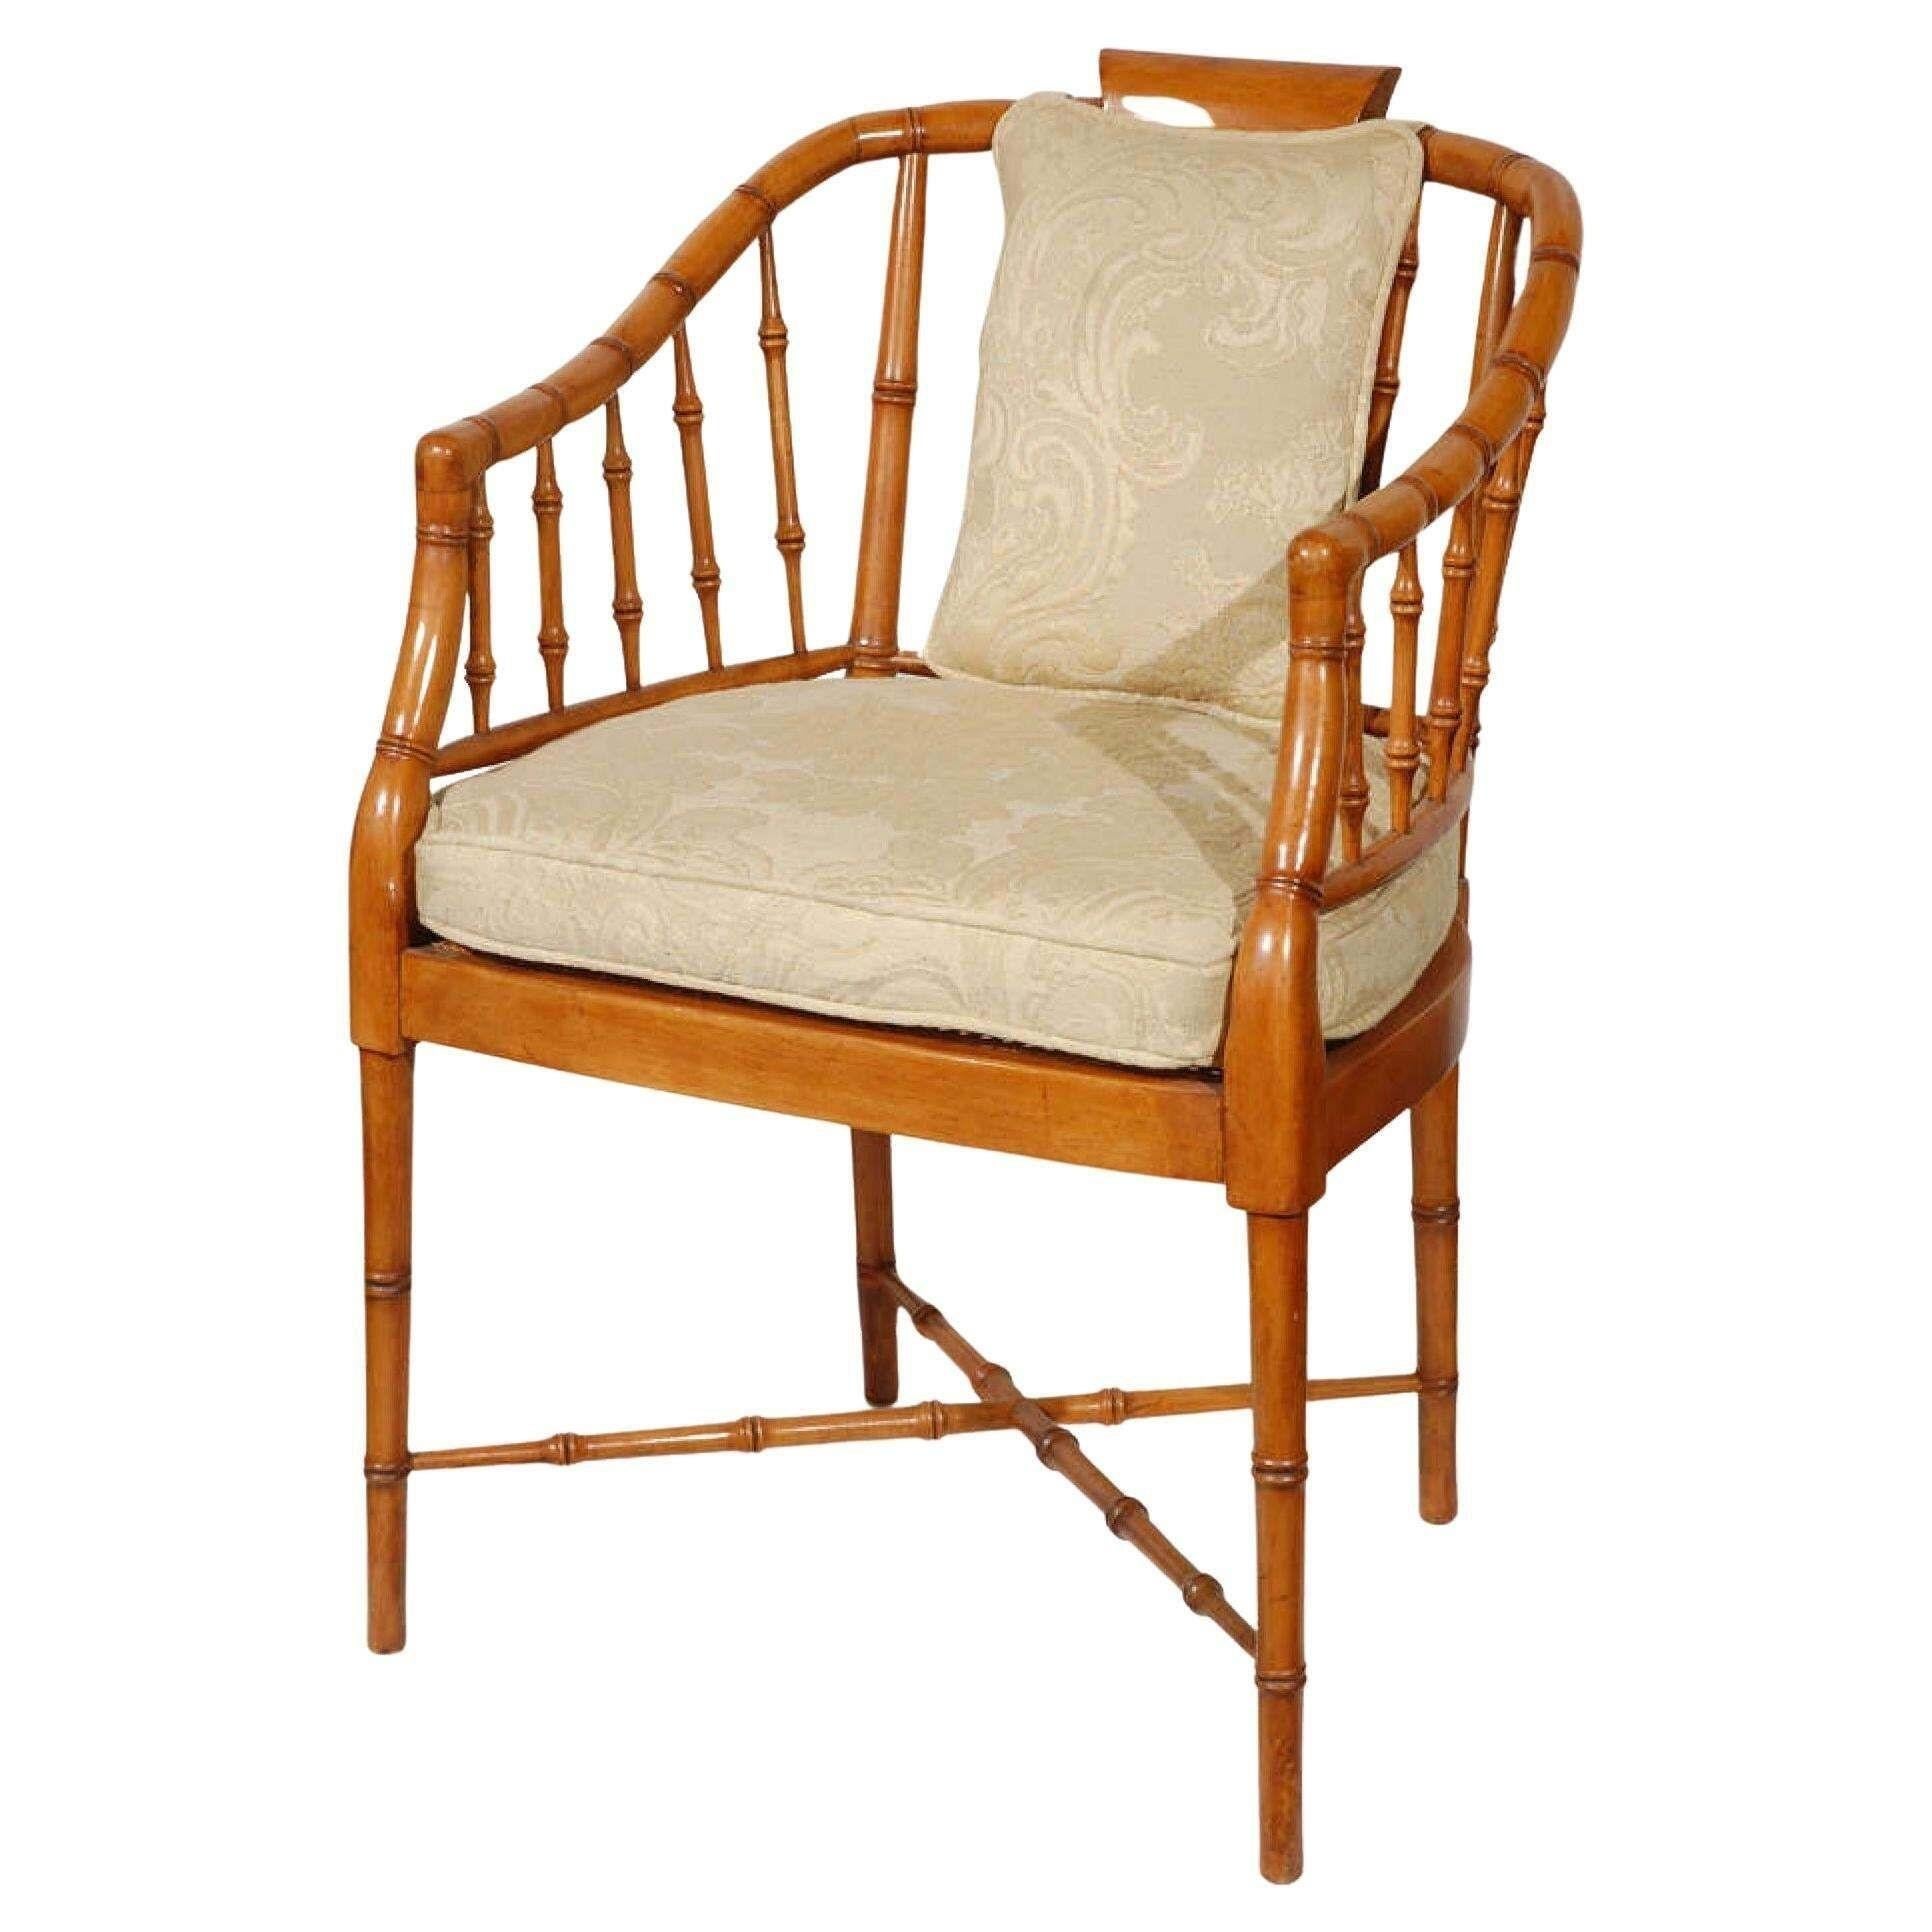 An elegant set of four vintage faux bamboo armchairs. Upholstered in a creamy fabric with a raised floral design.